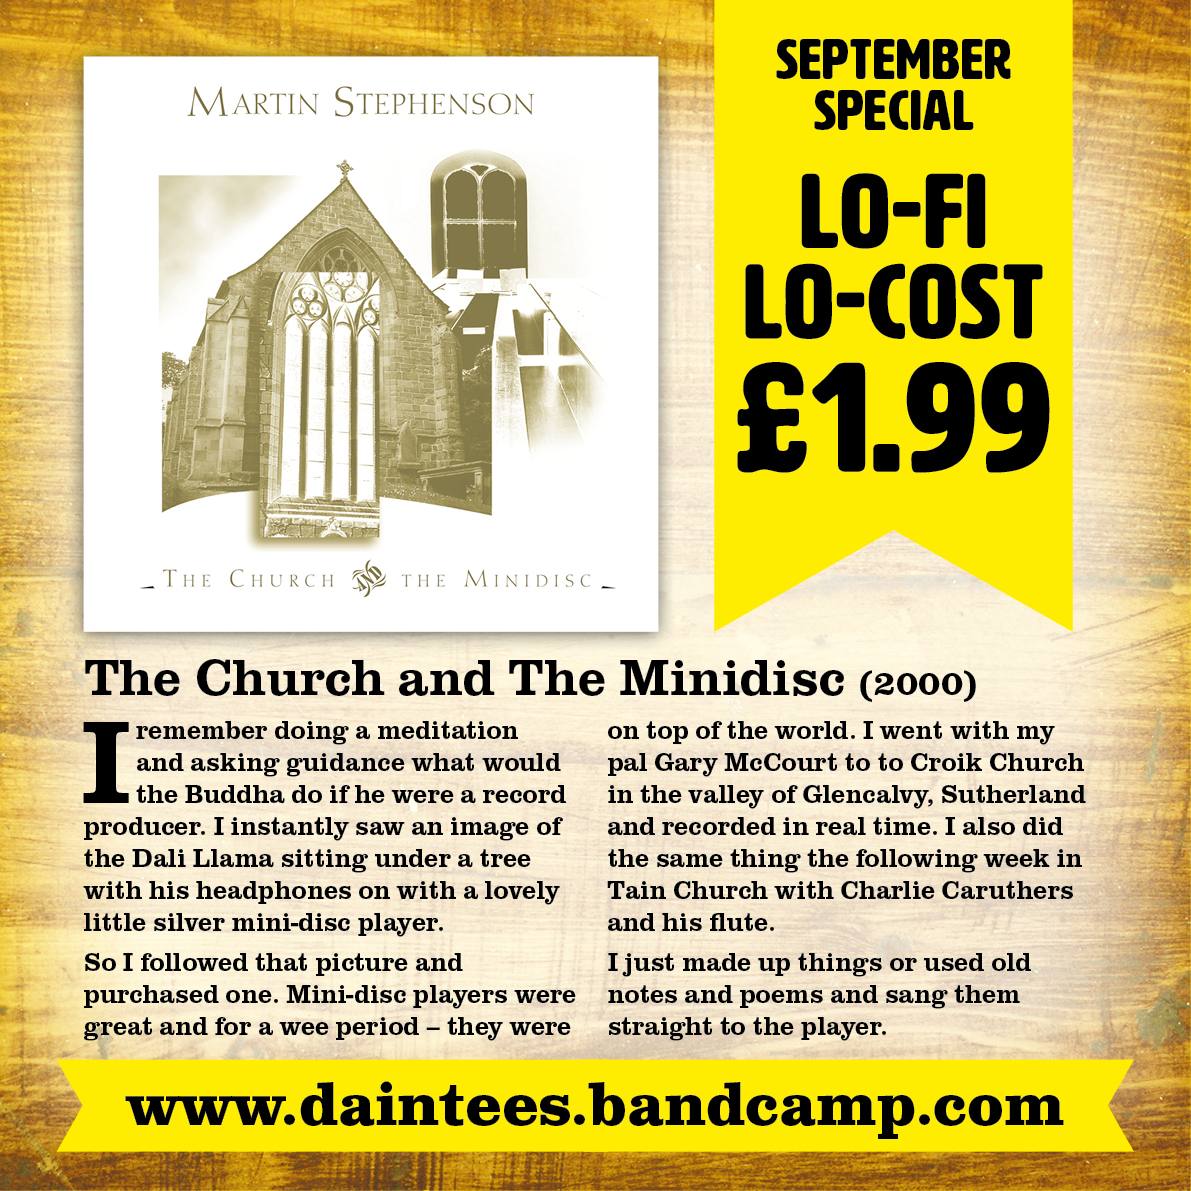 The Church & The Minidisc (2000)Just one of eighteen albums reduced to £1.99 in our September "Lo-Fi / Lo-Cost" promotion. Mx  http://daintees.bandcamp.com 